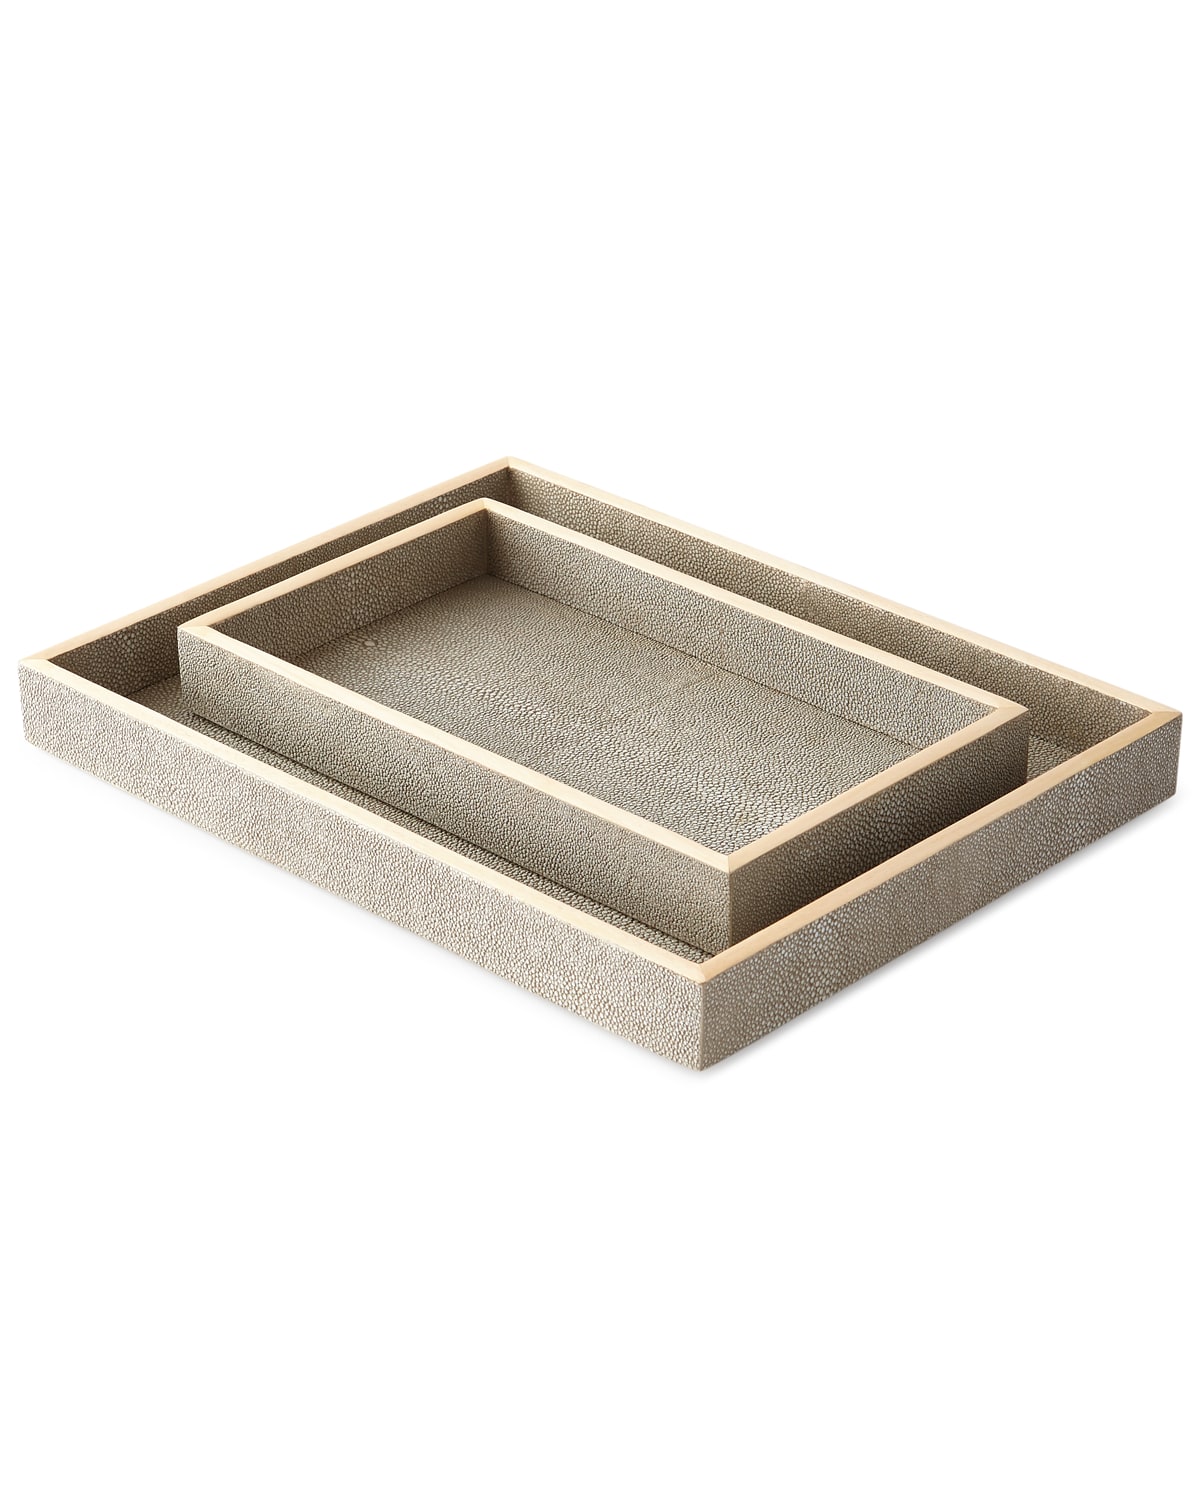 Pigeon & Poodle Manchester Vanity Tray Set In Sand